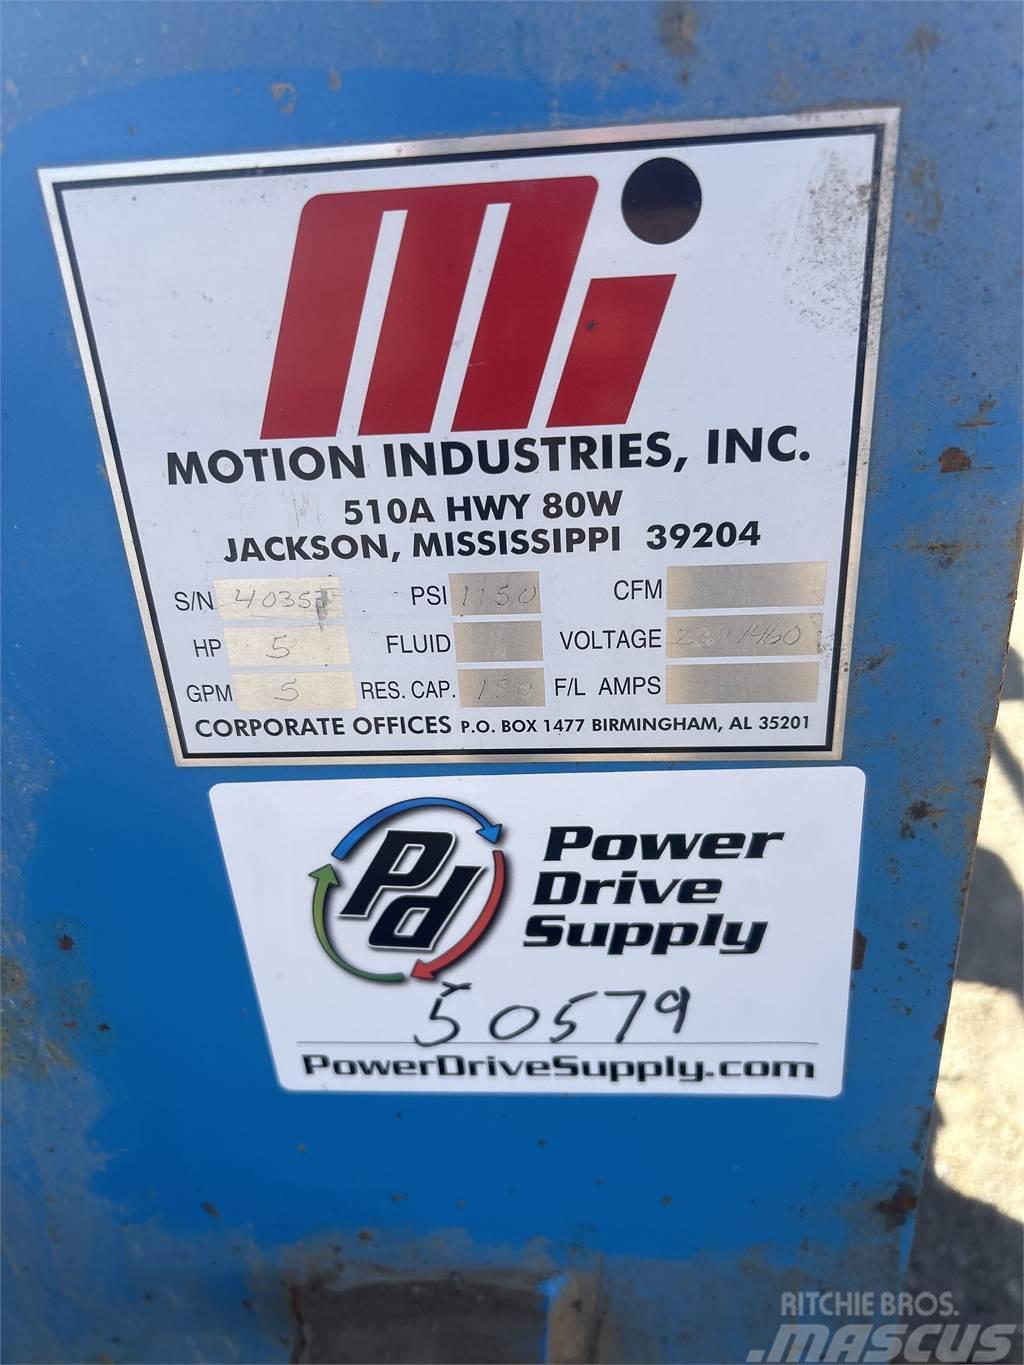  Motion industries Hydraulic Power Unit Other drilling equipment